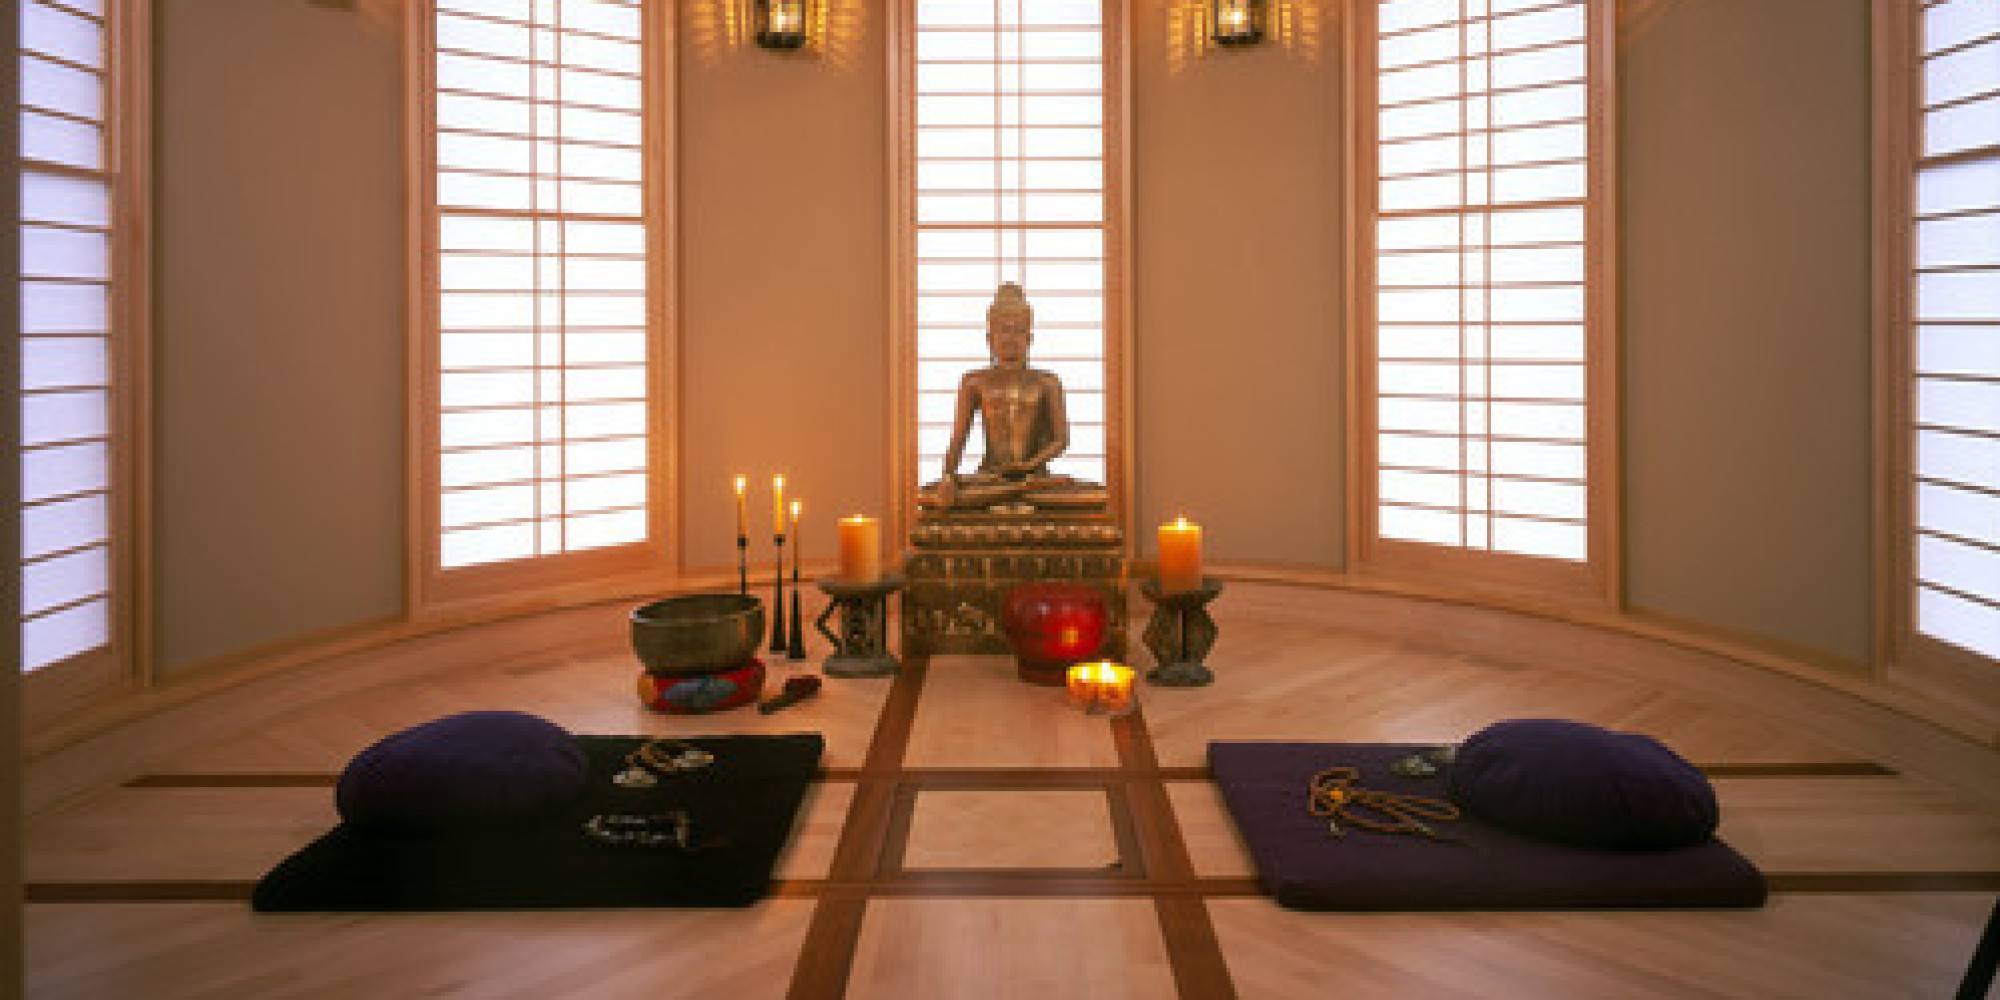 7 Spaces That Would Make Great Meditation Rooms (PHOTOS) | HuffPost